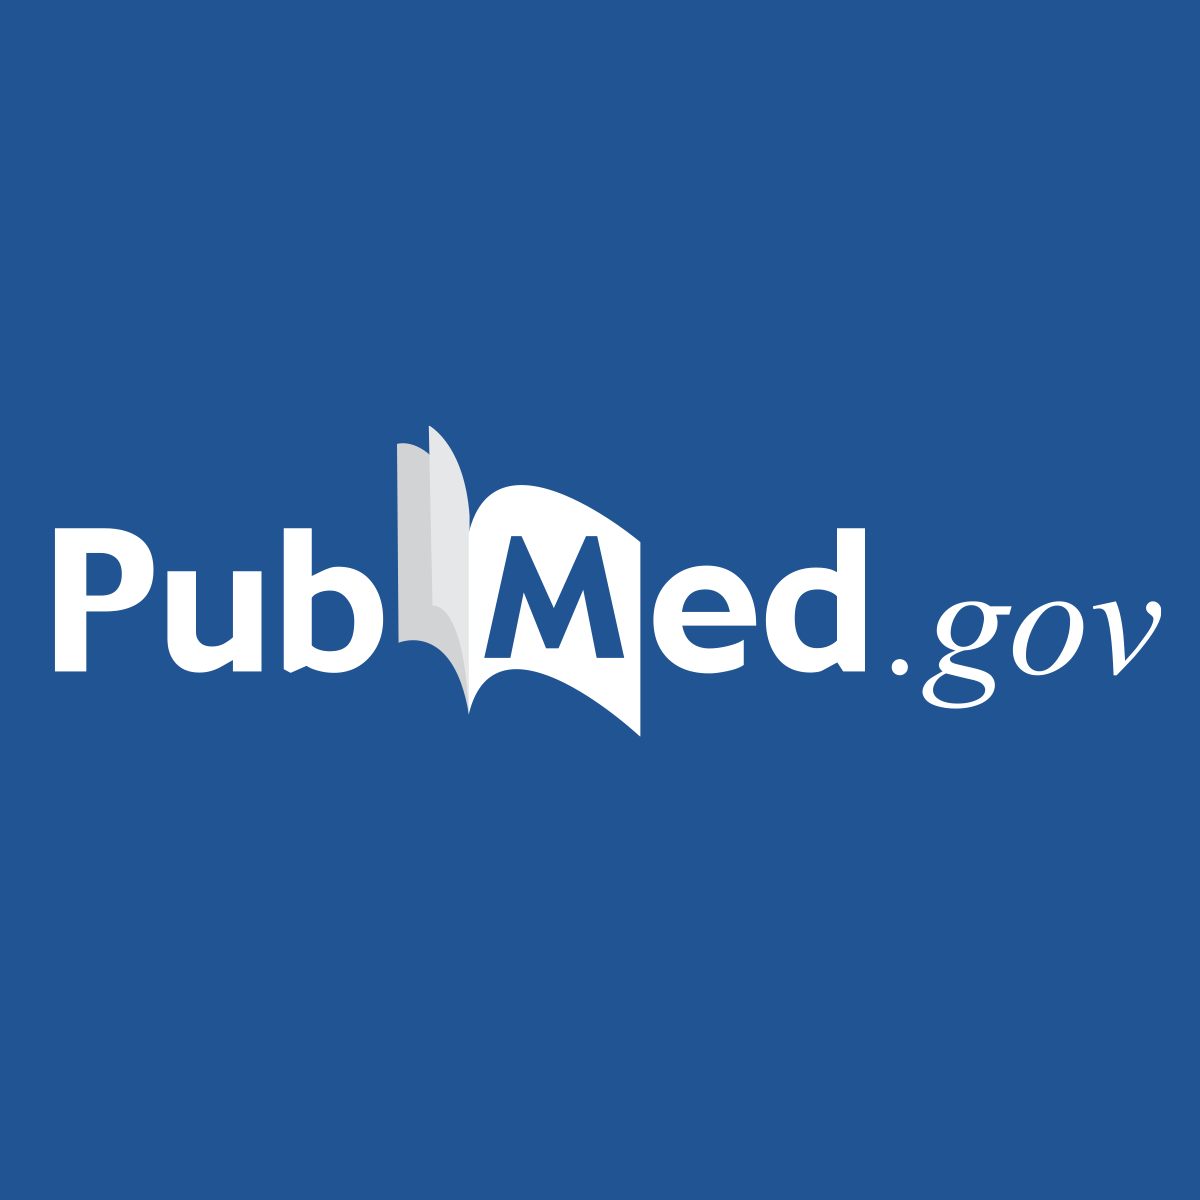 Impact of Attending Physicians' Comments on Residents' Workloads in the Emergency Department: Results from Two J(^o^)PAN Randomized Controlled Trials - PubMed